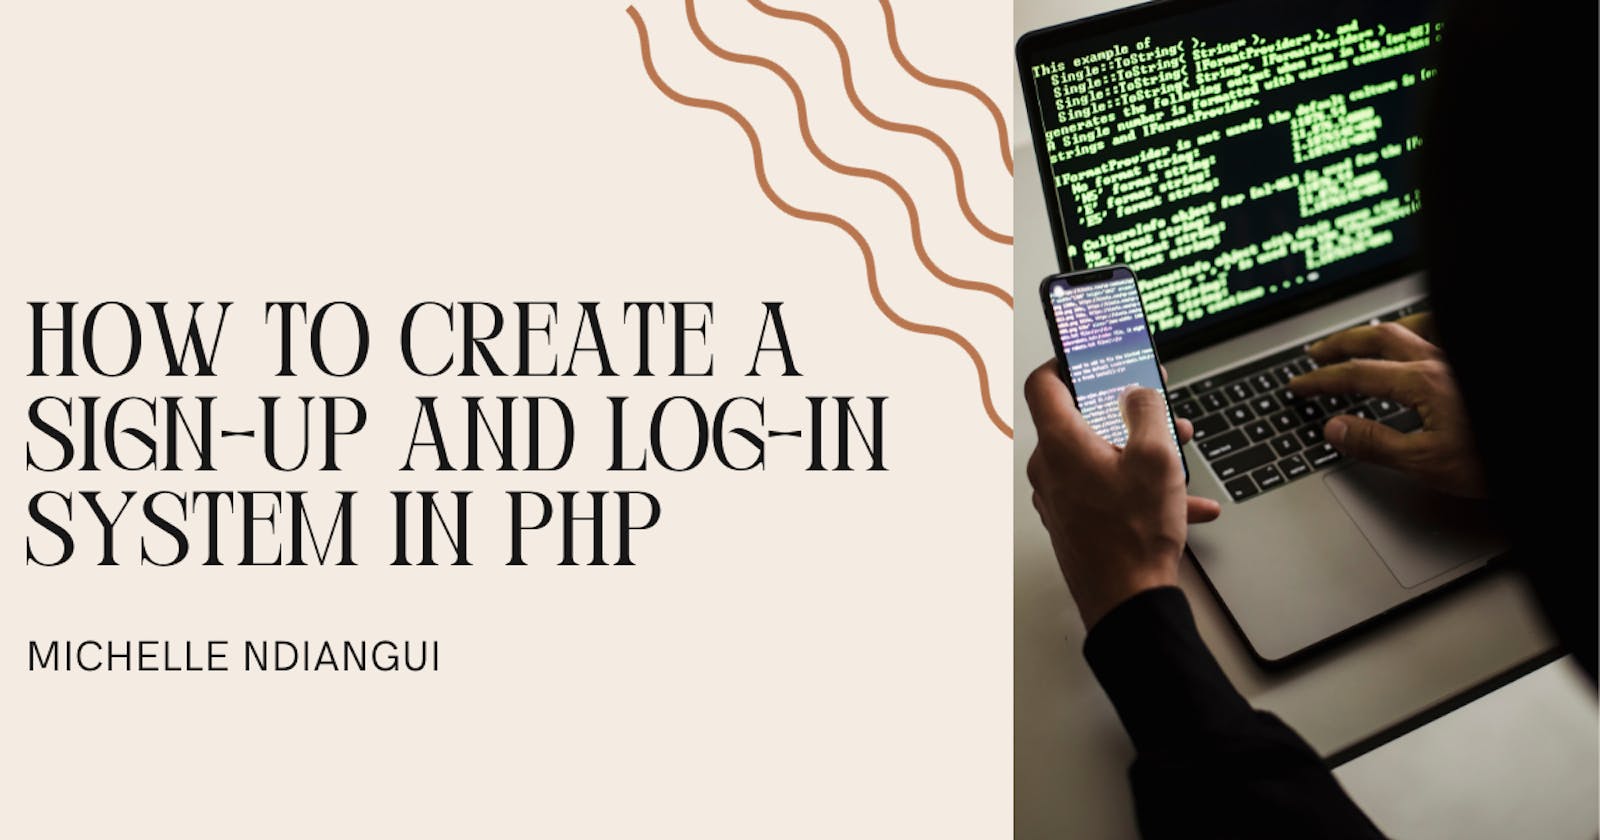 How to Create a Sign-Up and Log-In System in PHP